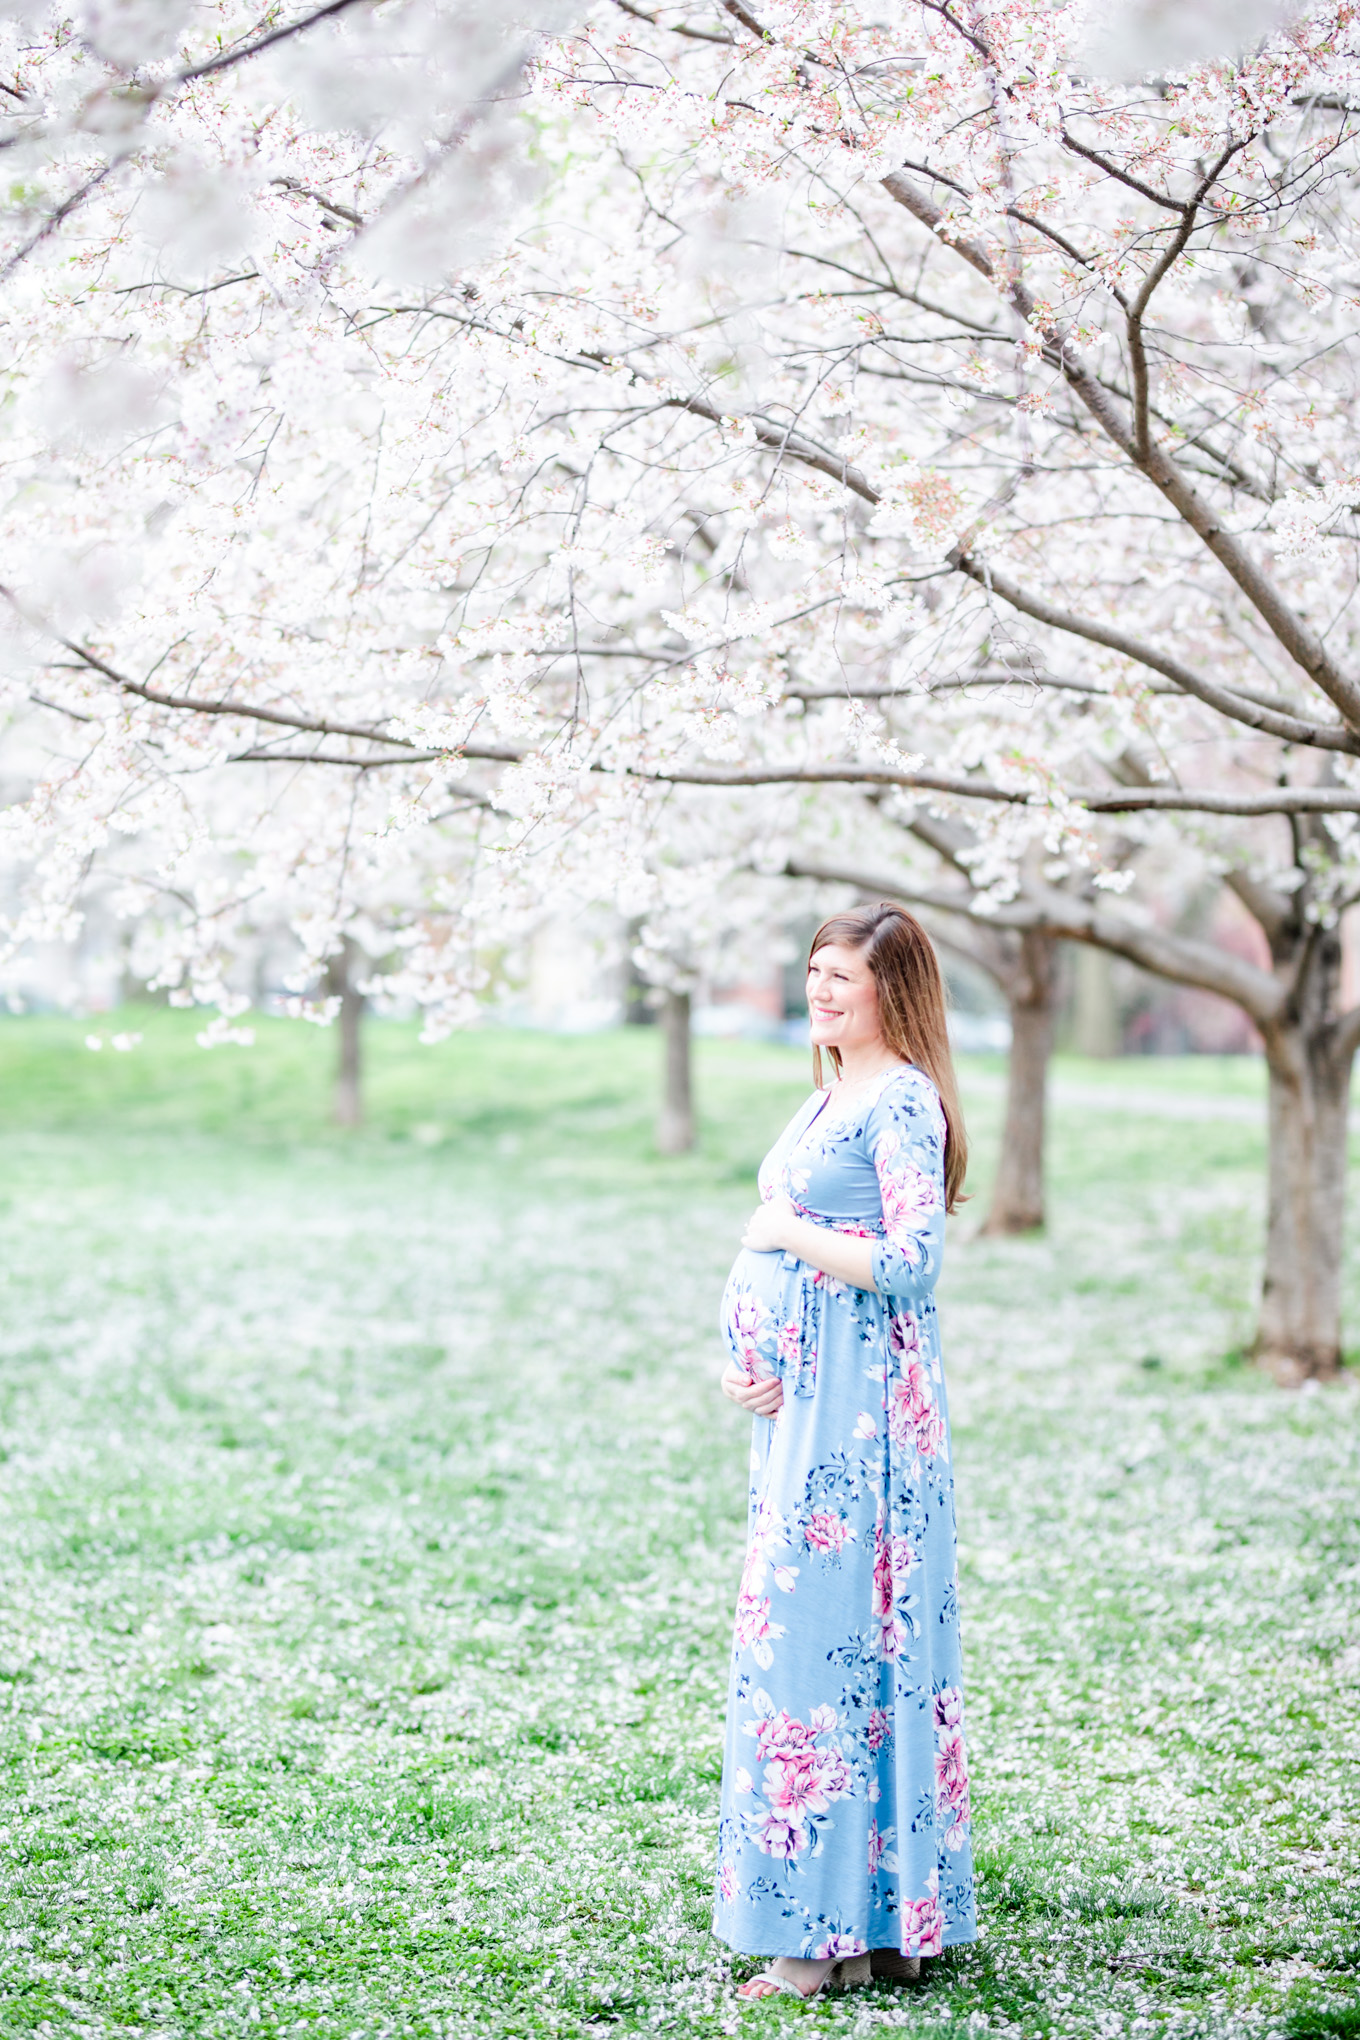 DC cherry blossoms maternity session, D.C. photos, spring maternity photos, sunrise maternity photos, DC sunrise, DC maternity photos, cherry blossoms maternity photos, Rachel E.H. Photography, maternity session style, maternity photos outfit ideas, Rose Park, romantic maternity photos, lush cherry blossoms trees